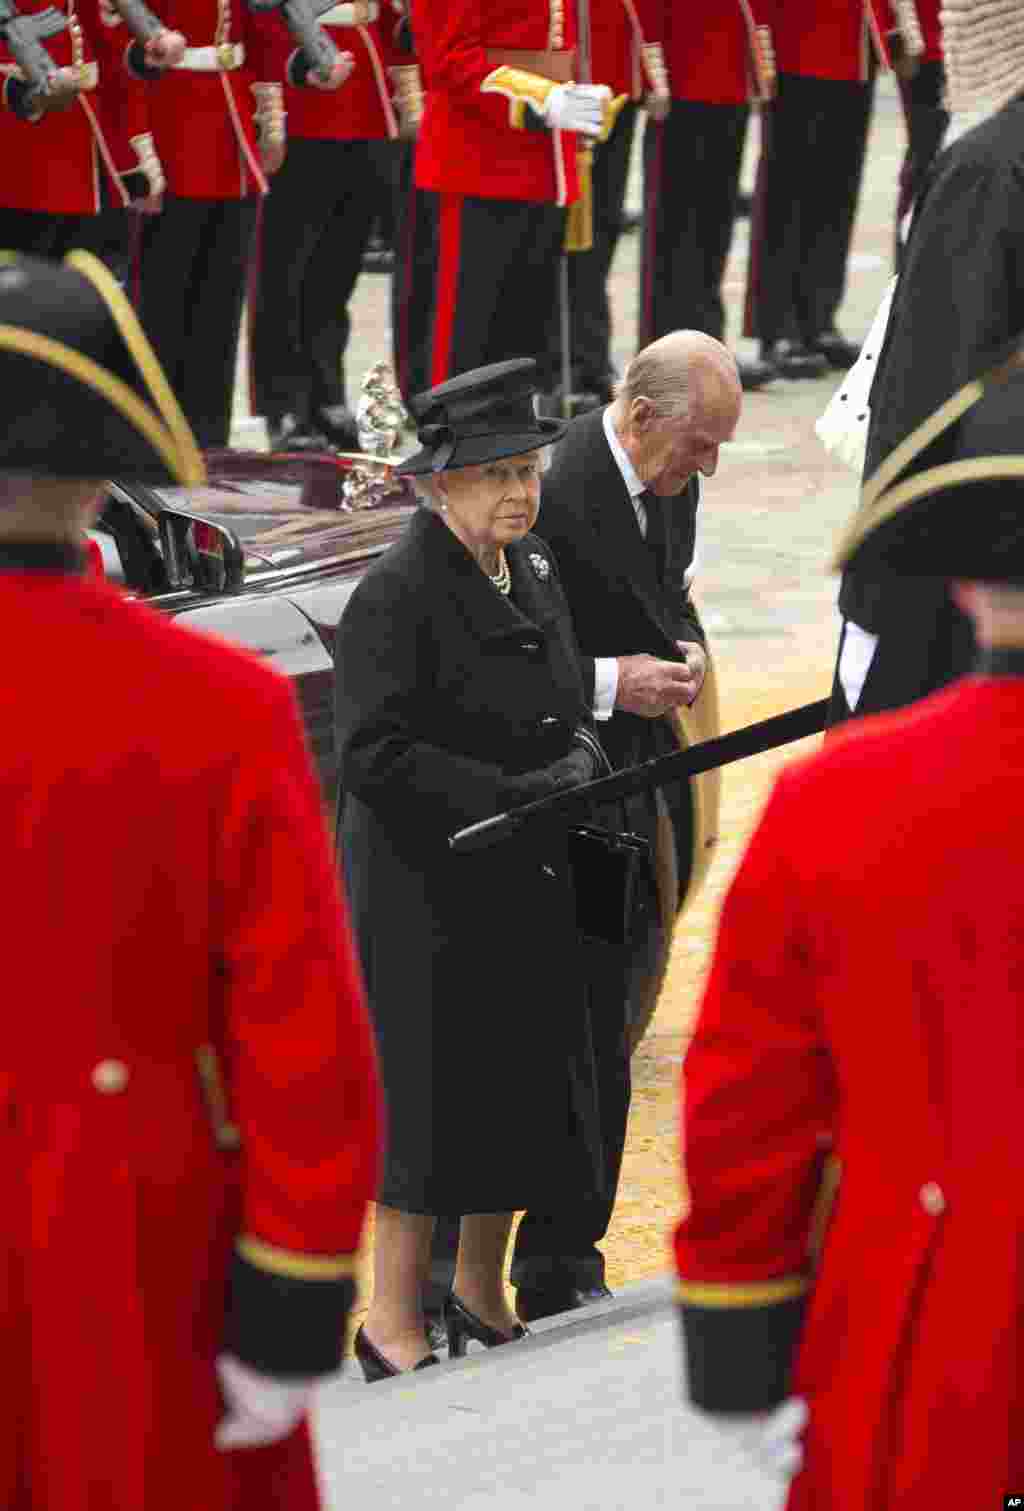 Britain's Queen Elizabeth II, center left, and her husband Prince Philip, the Duke of Edinburgh, arrive for the funeral of former British Prime Minister Margaret Thatcher, outside St. Paul's Cathedral, central London, Wednesday, April 17, 2013. A coffin c